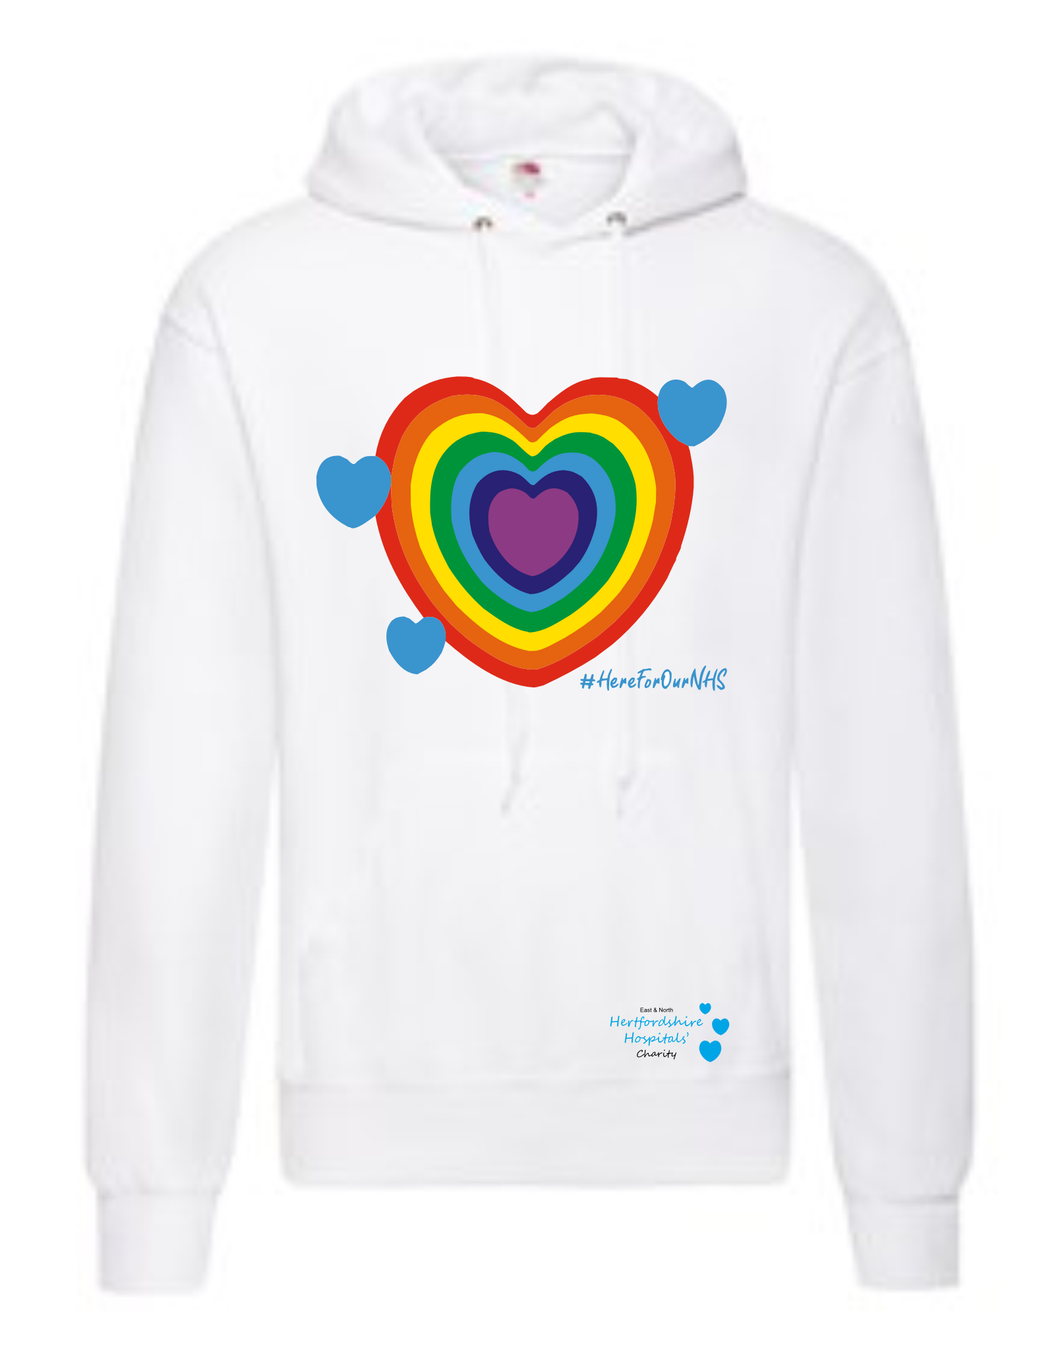 East and North Hertfordshire Hospitals Charity unisex adult hoodie